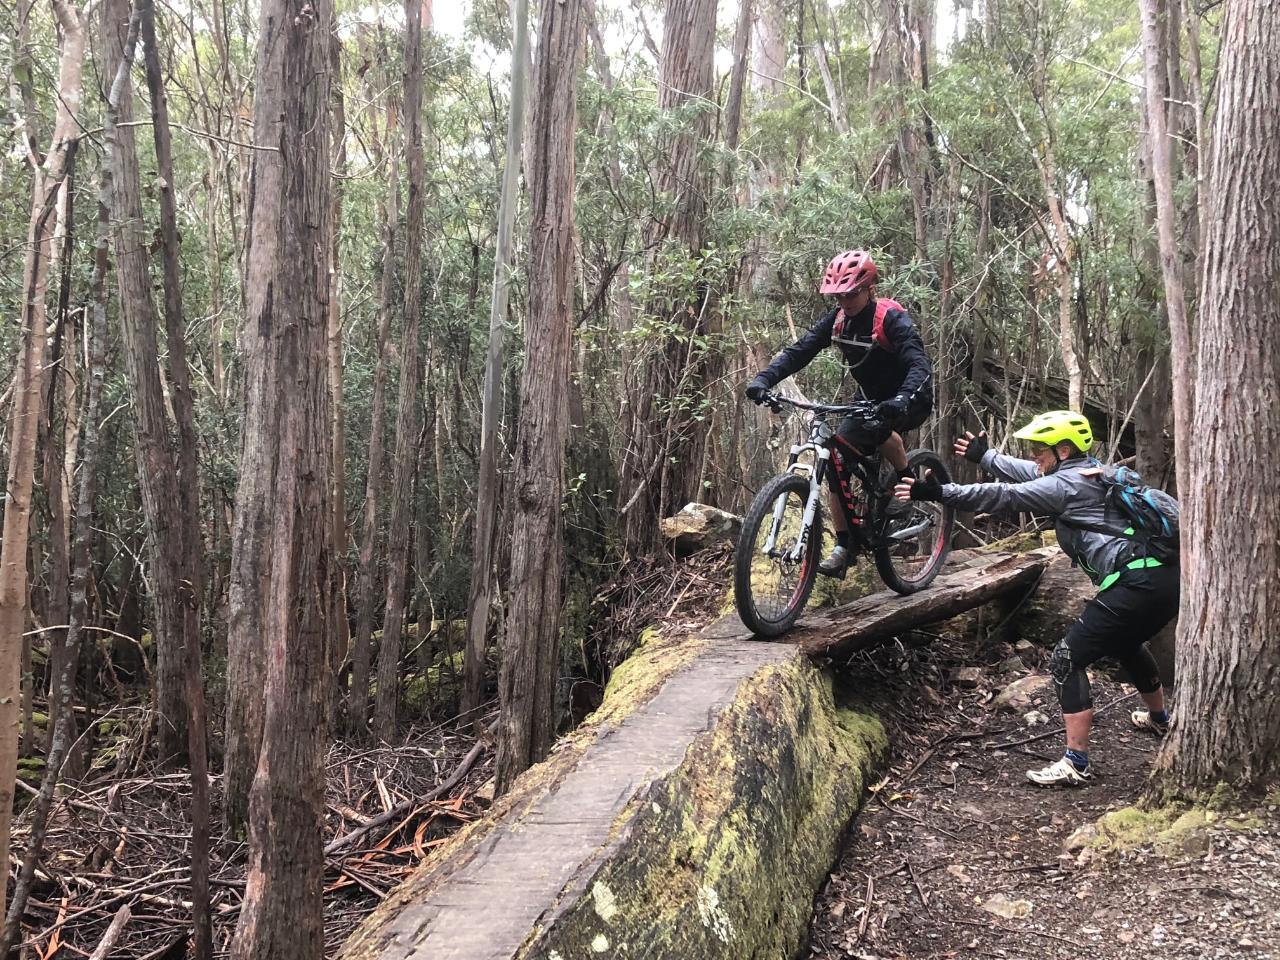 Mt. Wellington MTB Shuttle: Pick up from Glenorchy MTB Park and South Hobart.